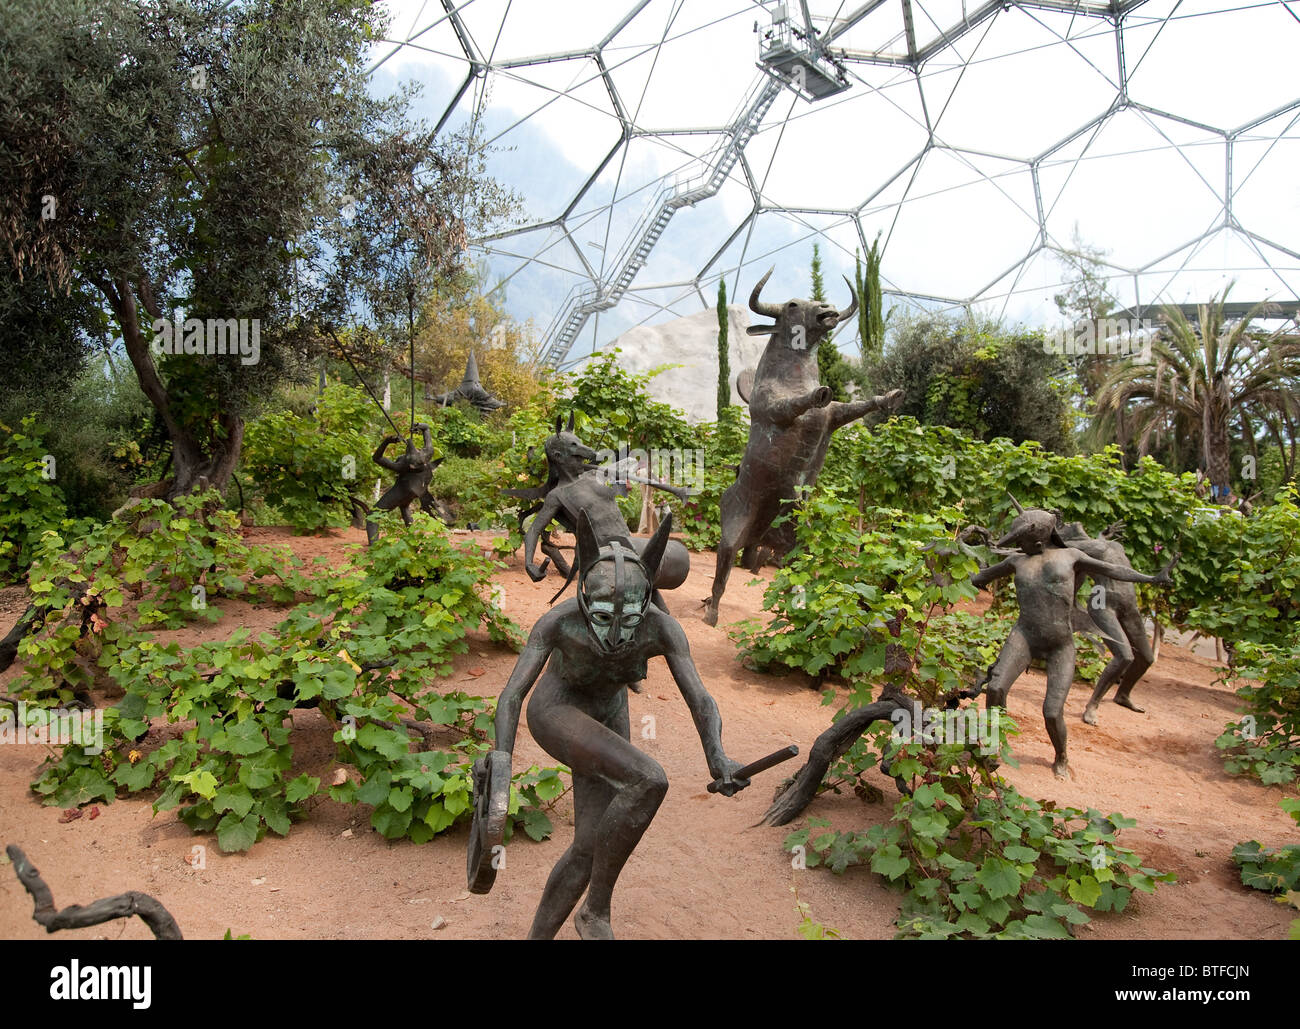 Life size sculpture of Greek God Dionysus and the priestesses musicians Maenad, by Tim Shaw, Eden Project, Cornwall, UK Stock Photo